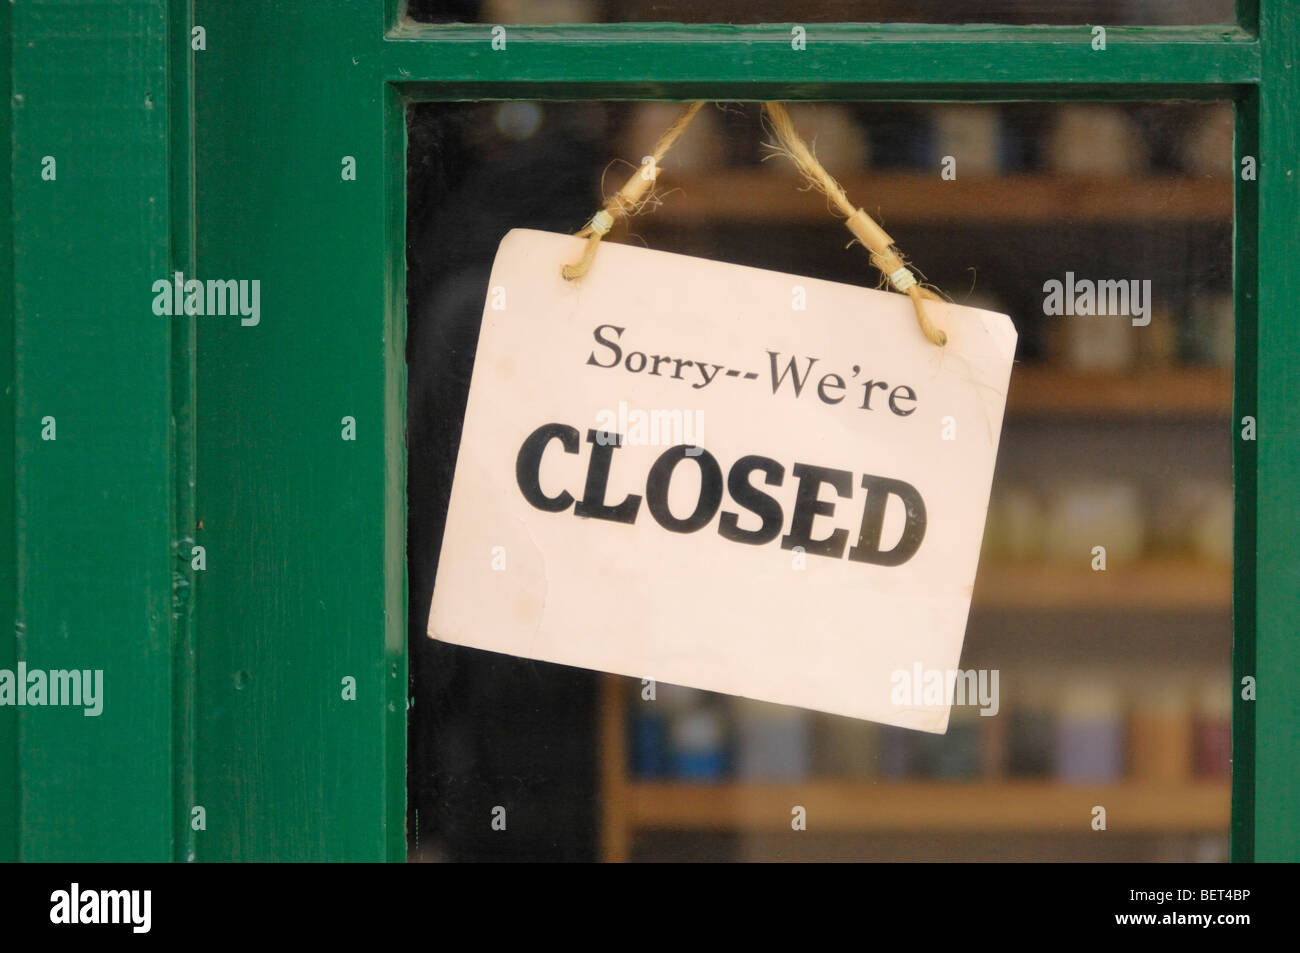 Sorry We're Closed sign hanging in a shop window Stock Photo